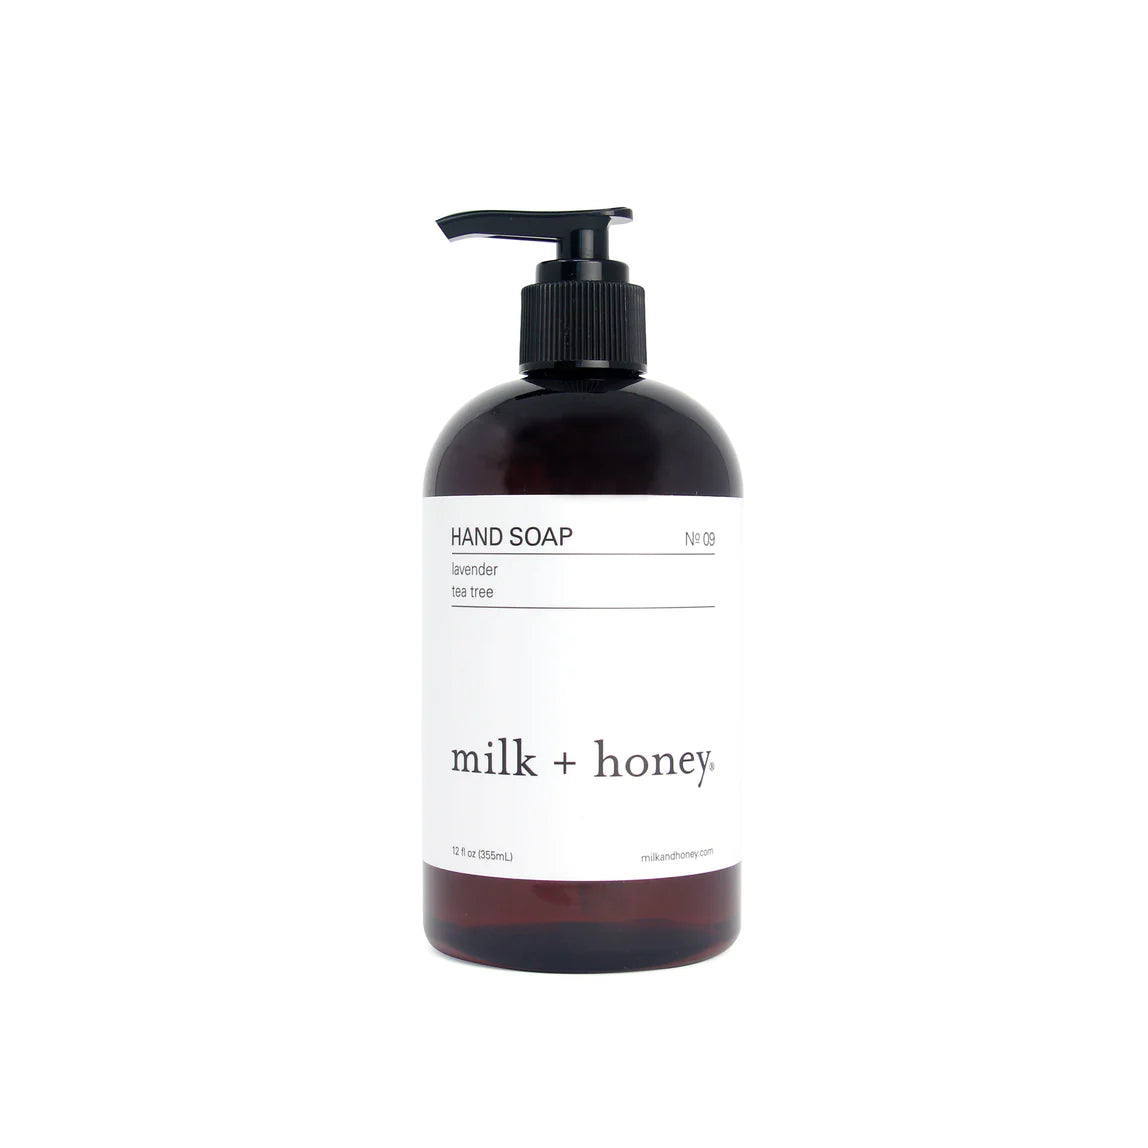 M + H Hand Soap